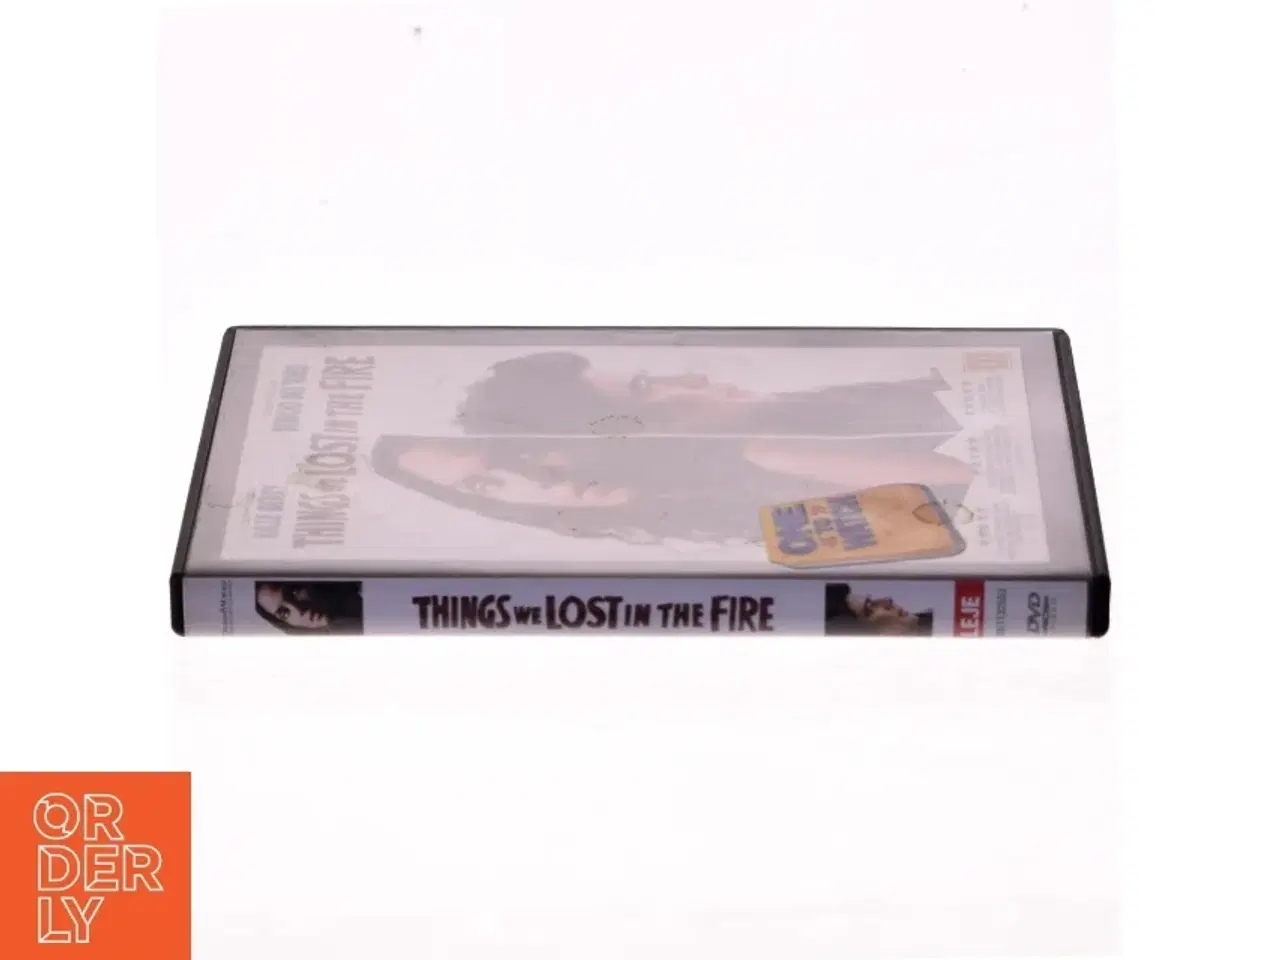 Billede 2 - 'Things We Lost in the Fire (DVD) fra Blockbuster